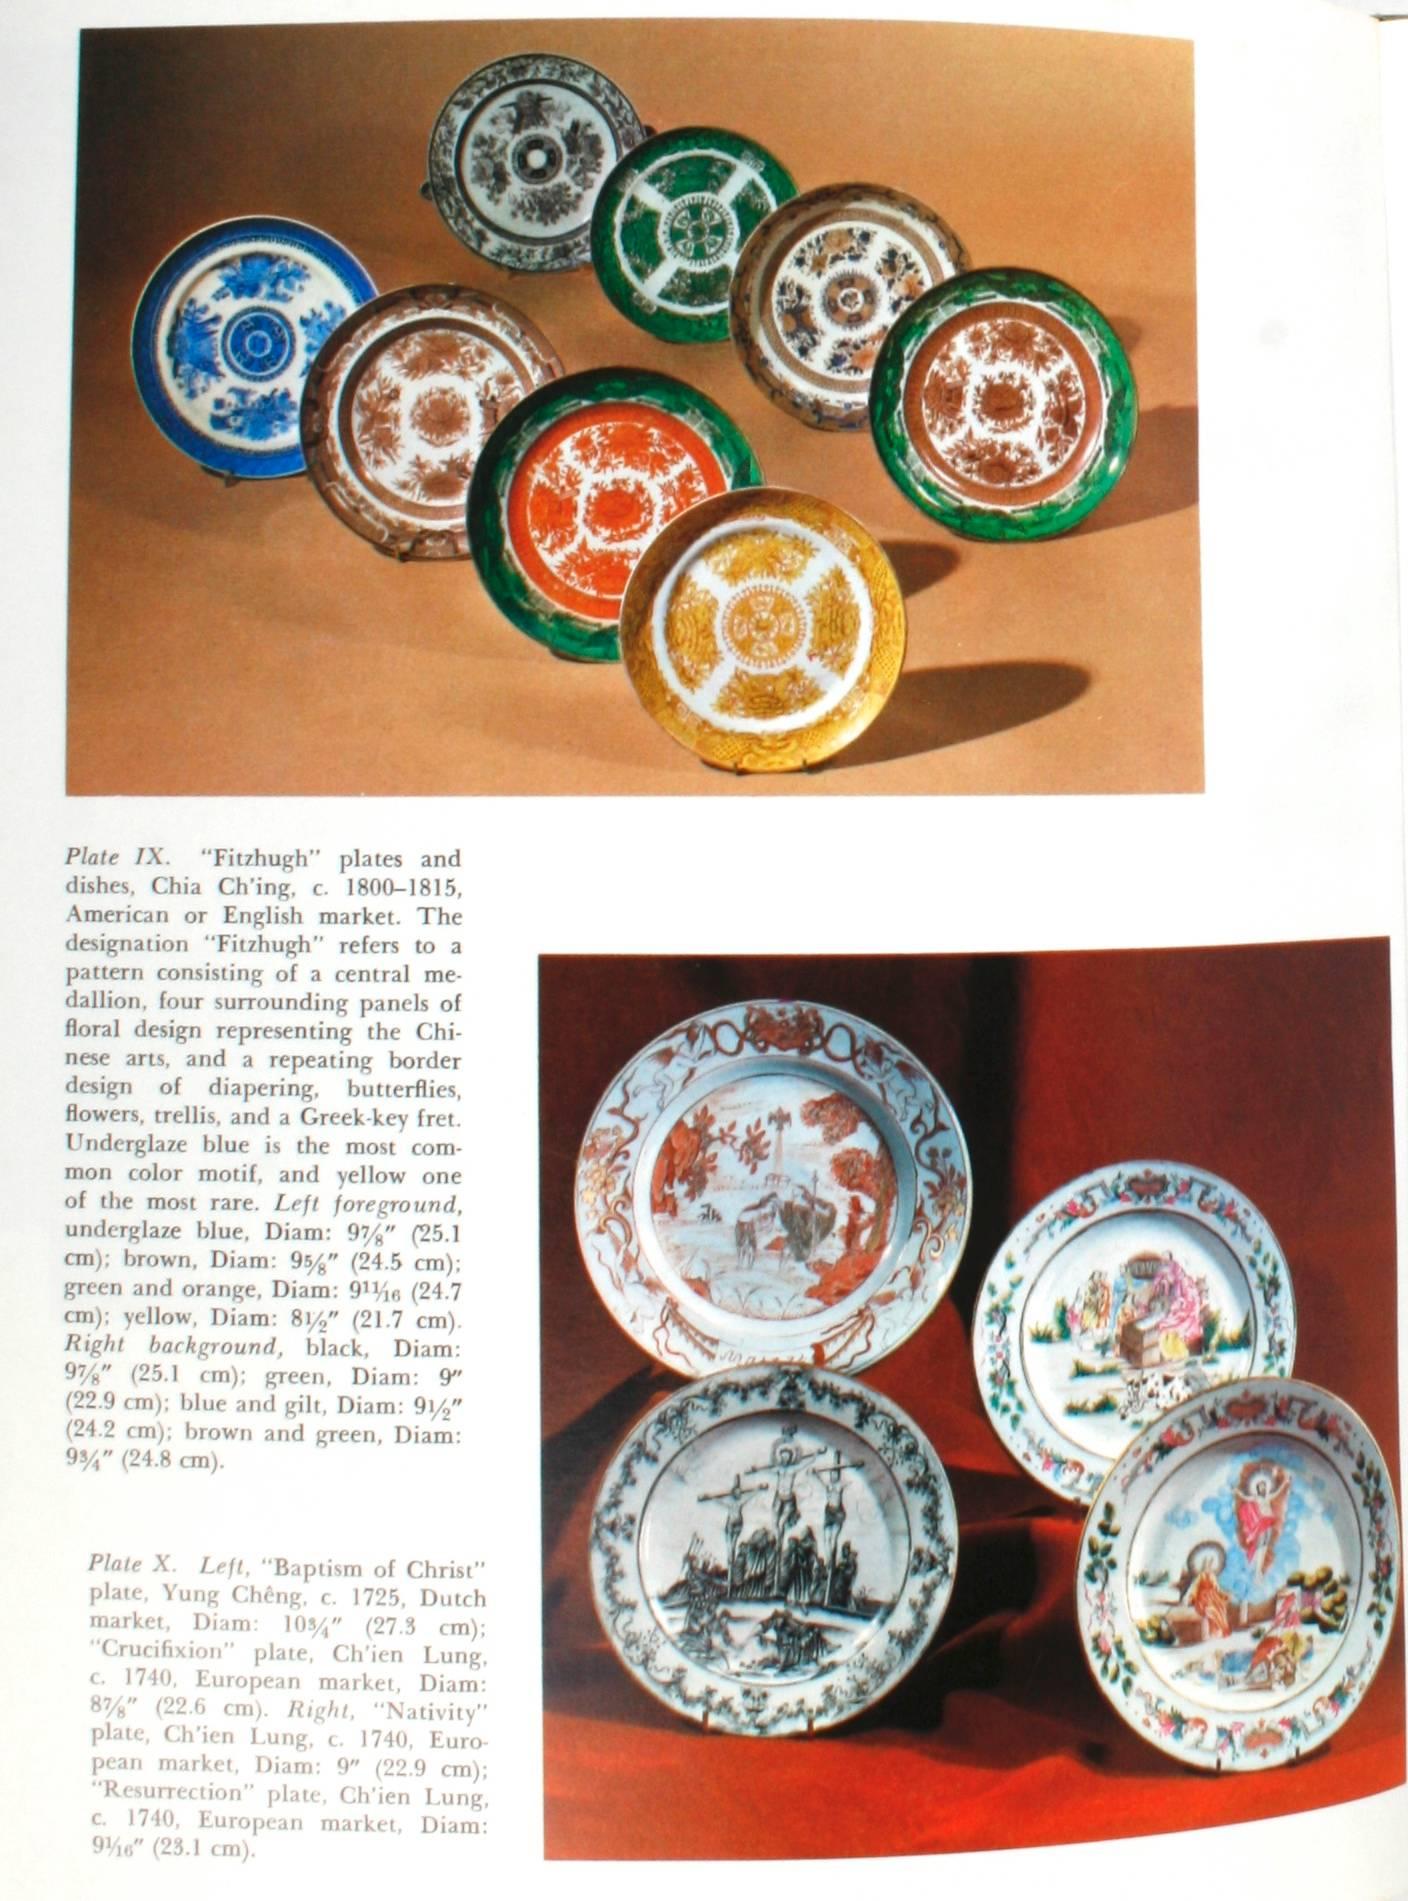 Paper Collecting Chinese Export Porcelain, First Edition